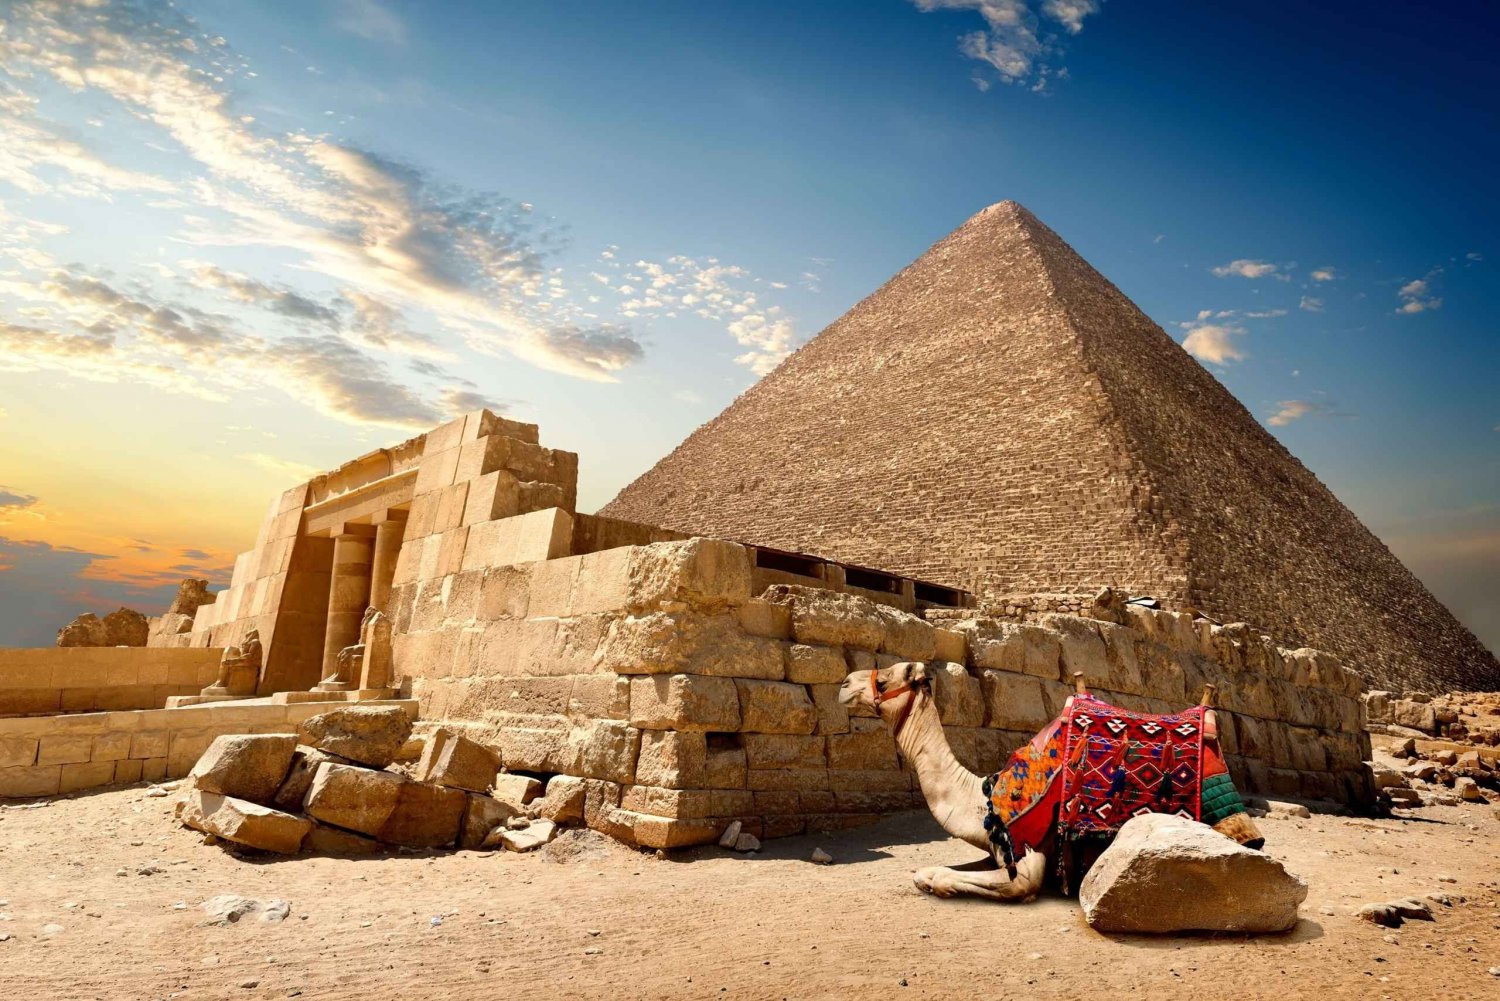 Cairo: Pyramid and Museum Tour with Entrance Fee Included